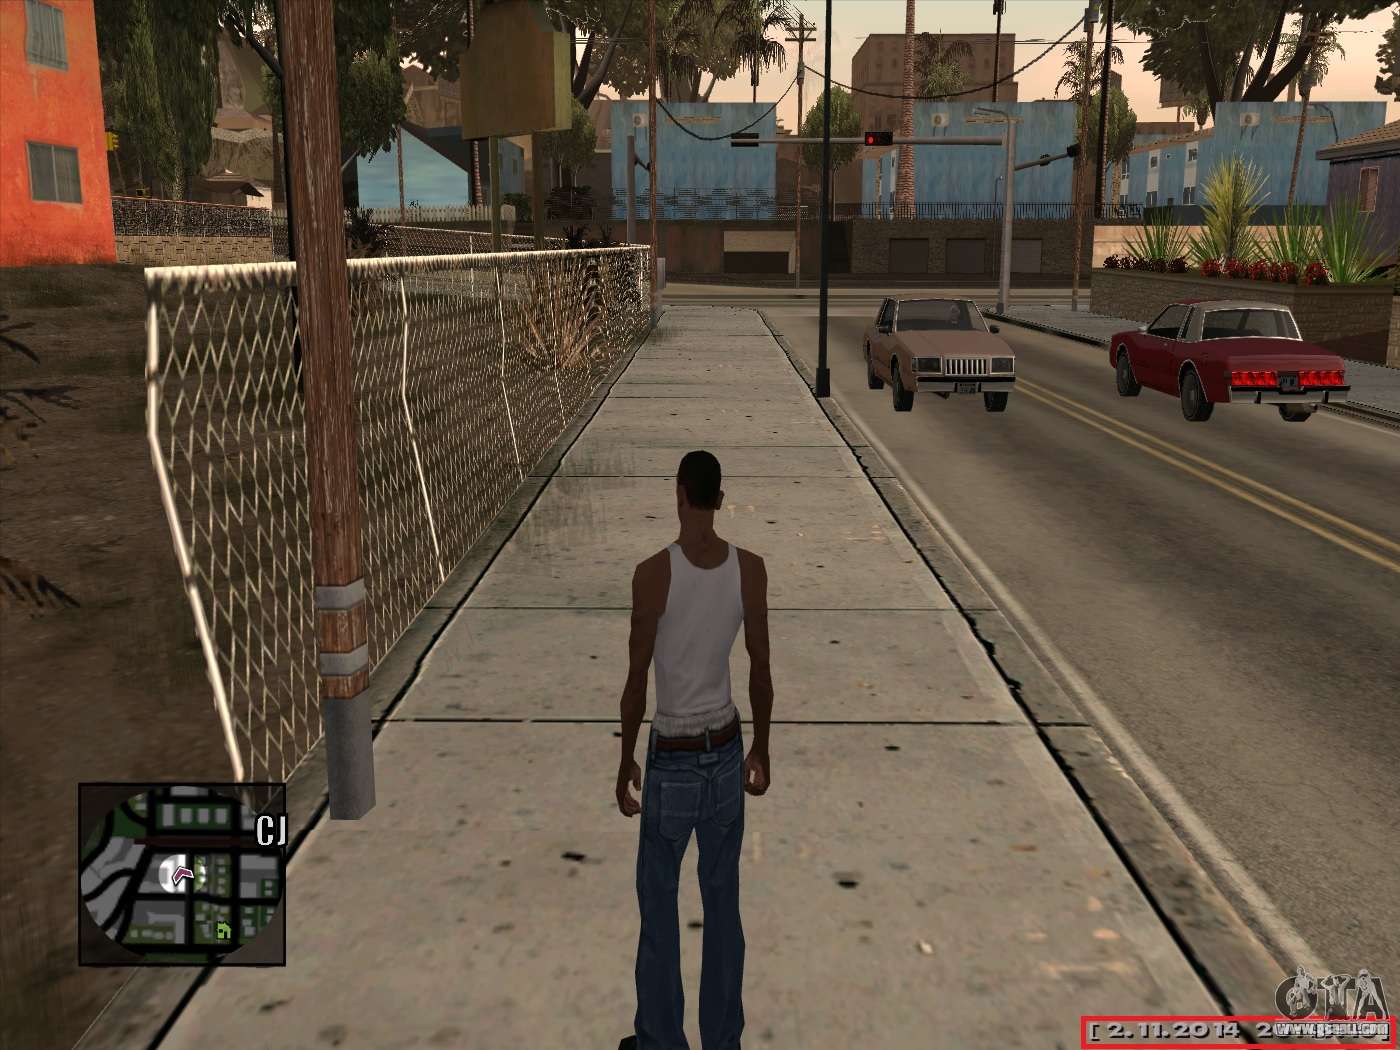 Cleo Date And Time For Gta San Andreas